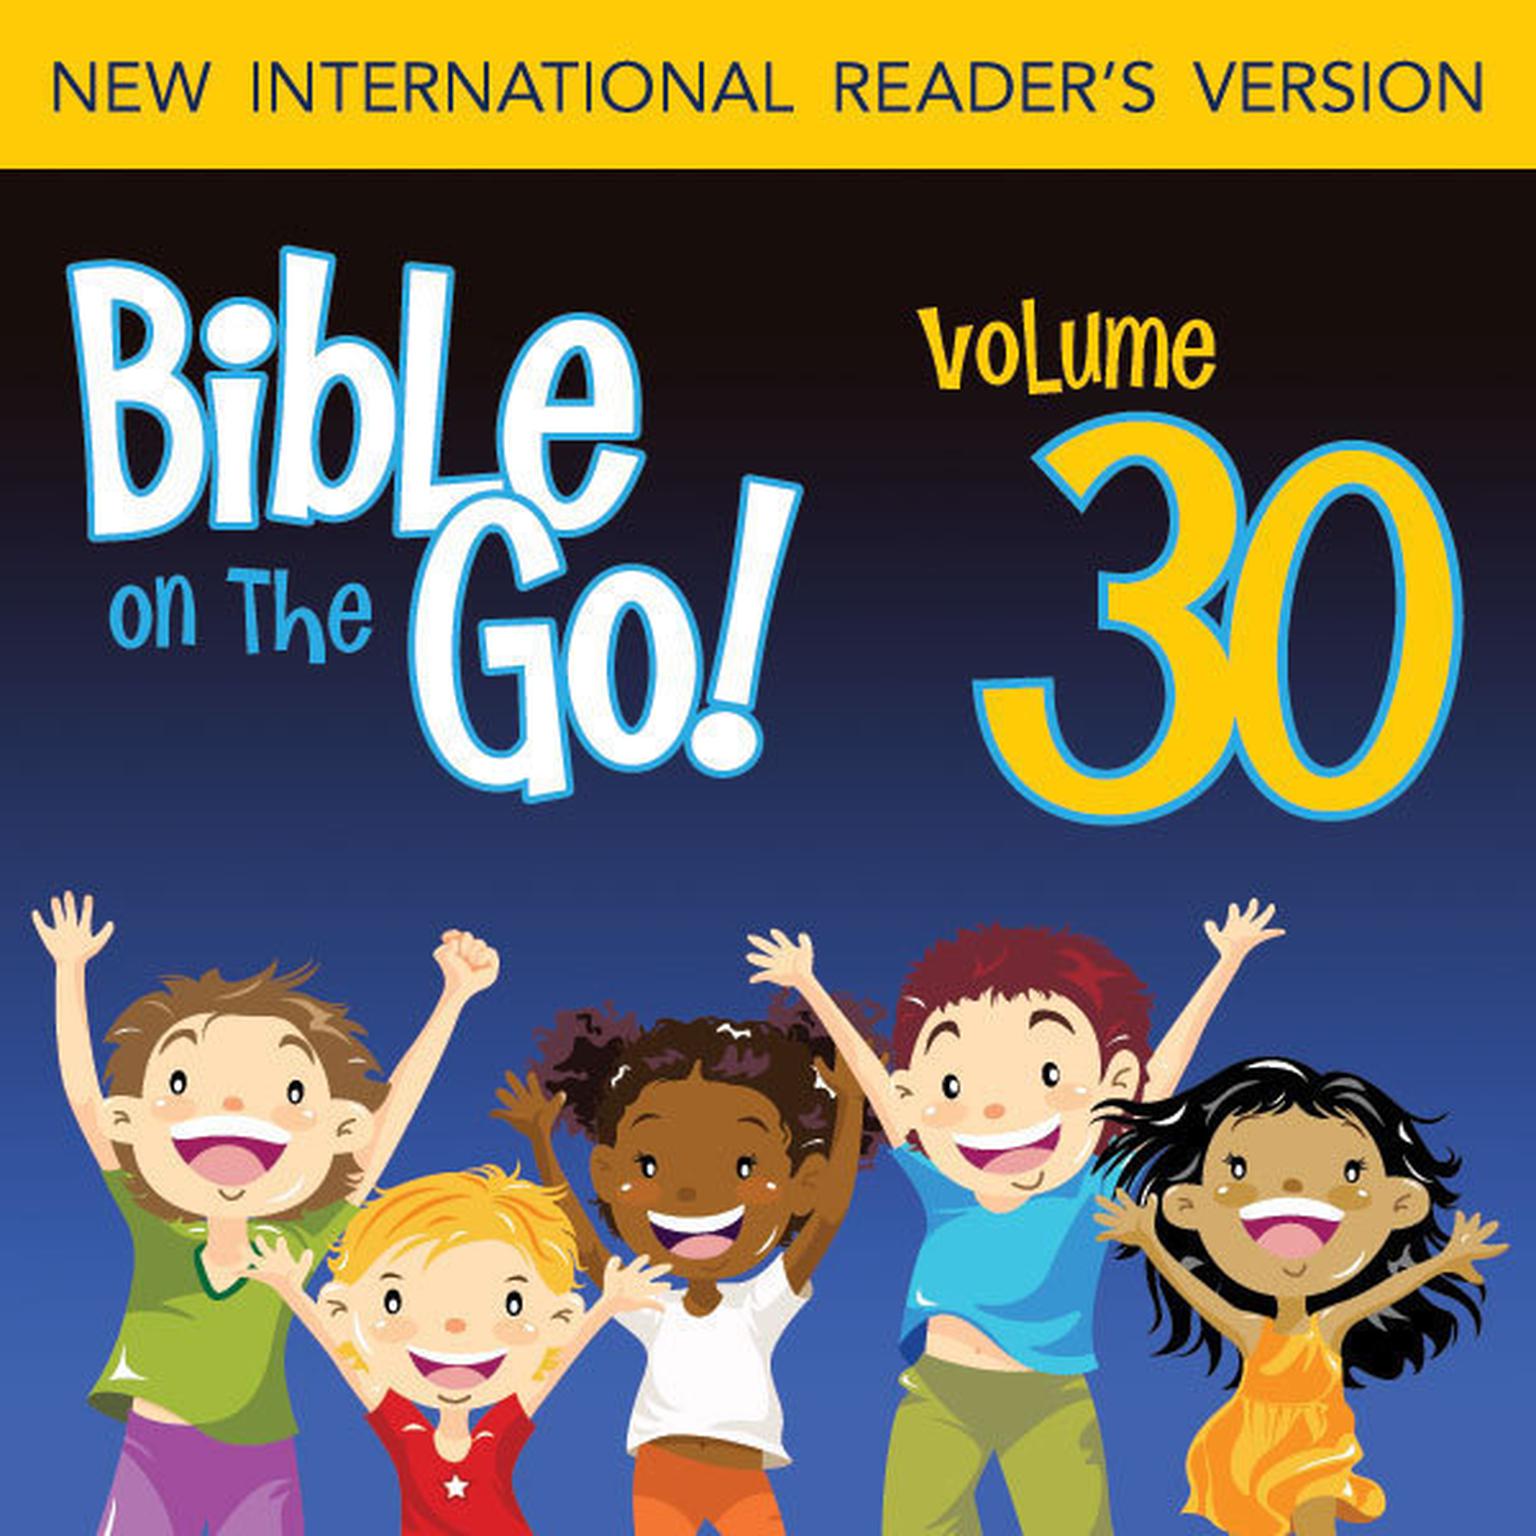 Bible on the Go Audio Bible - New International Readers Version, NIrV: Vol. 30 Words from the Prophet Isaiah, Part 1 (Isaiah 6, 7, 9, 11, 12, 35, 40, 53, 60, 64) Audiobook, by Zondervan